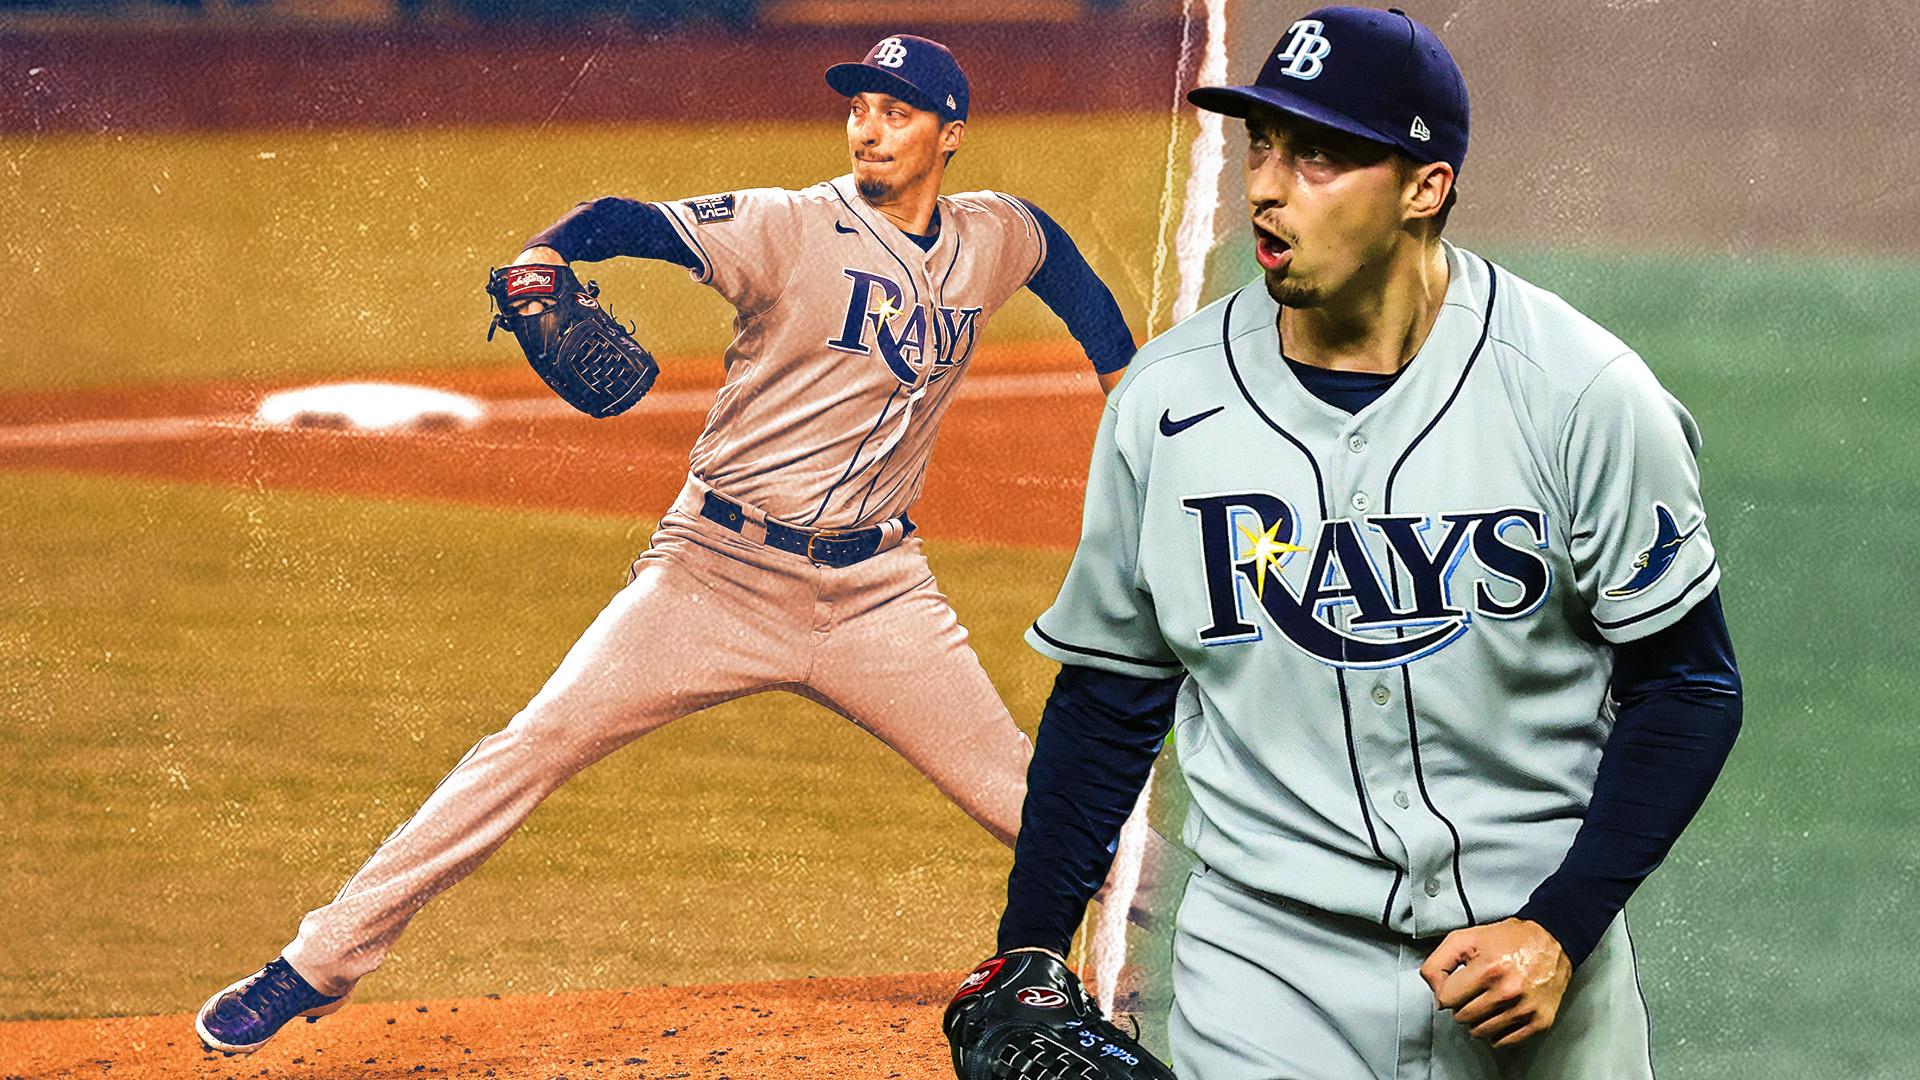 Blake Snell / SNY treated image